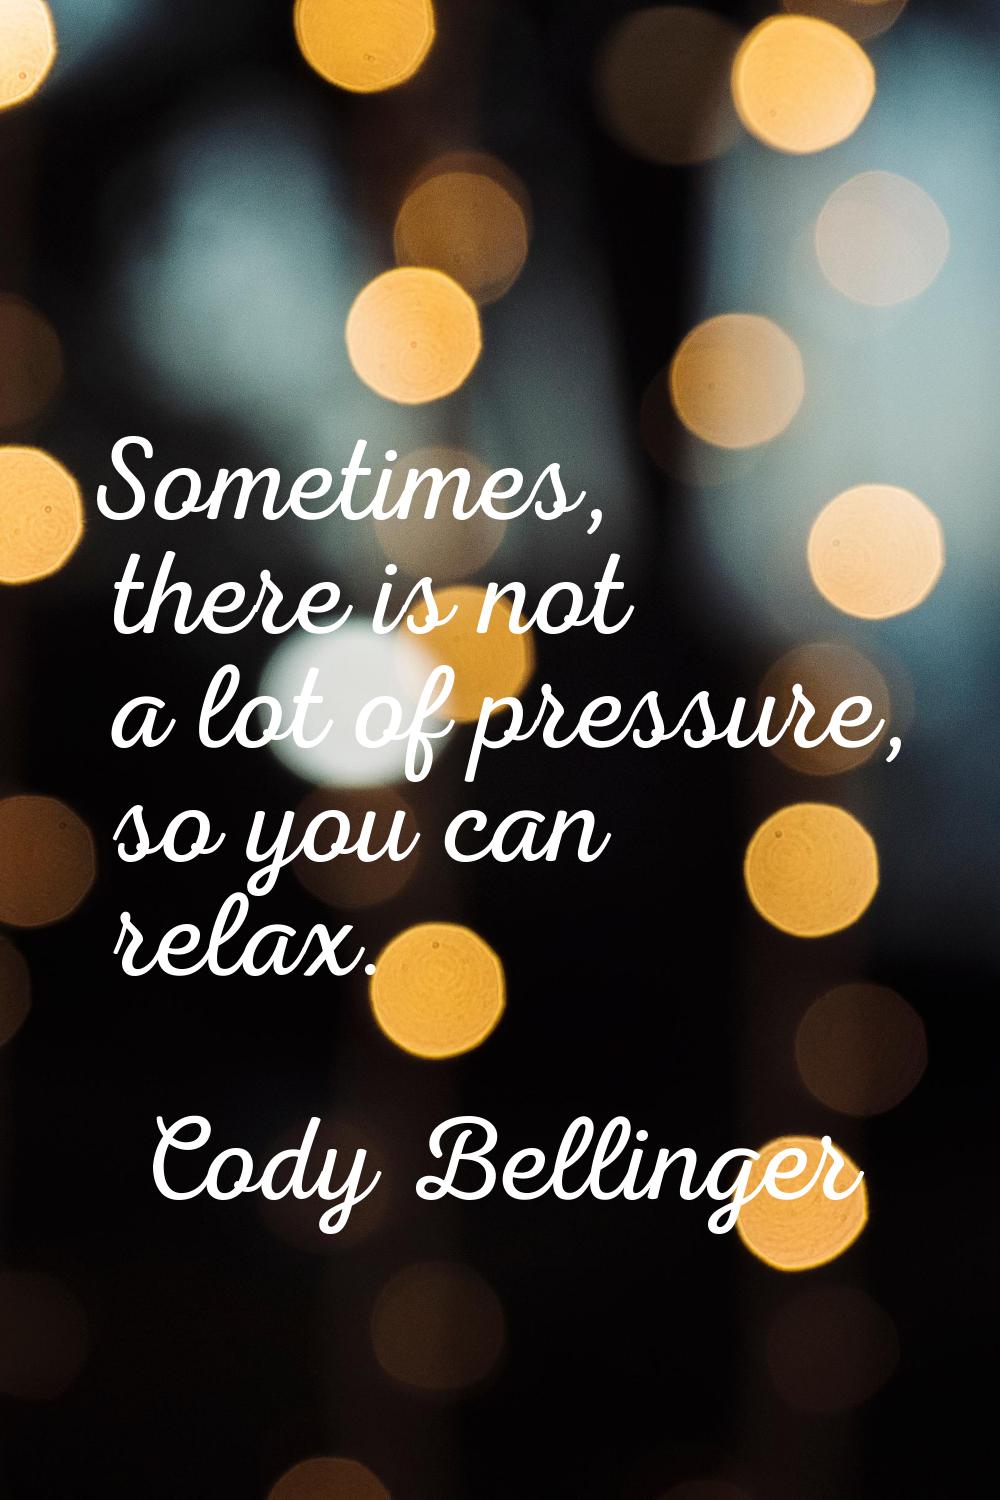 Sometimes, there is not a lot of pressure, so you can relax.